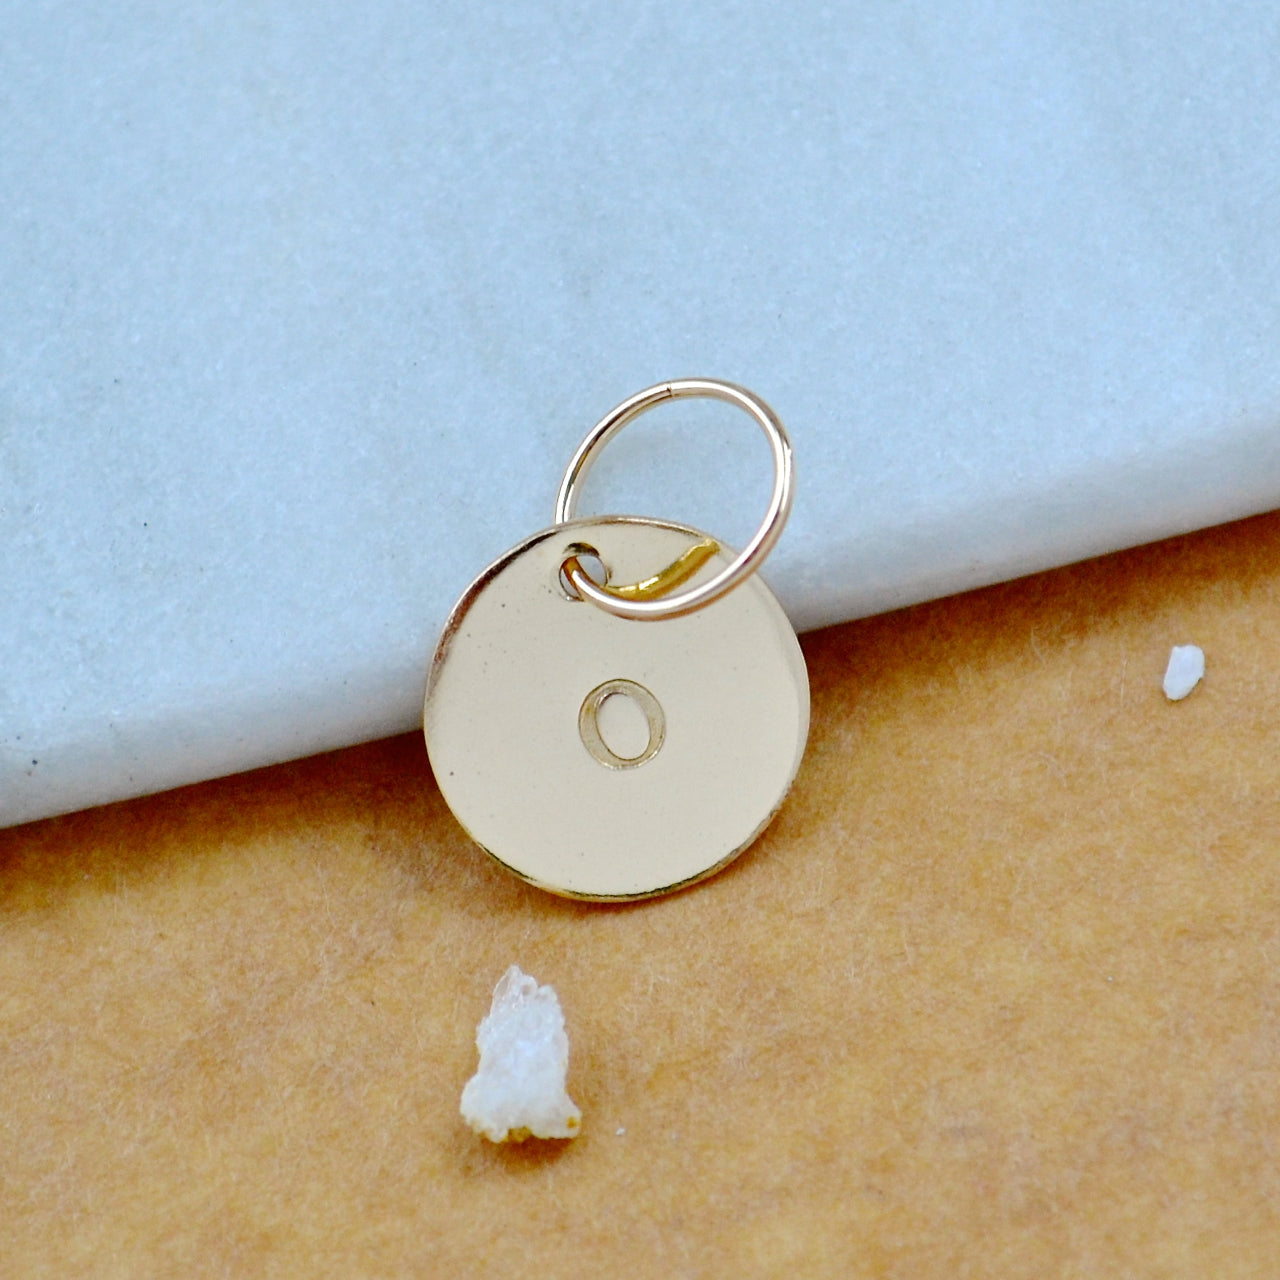 LETTER CHARM, capital O initial charms, handmade alphabet circle charm, O letter pendant, simple jewelry, delicate handmade charms, nickel-free jewelry, gold letter charm